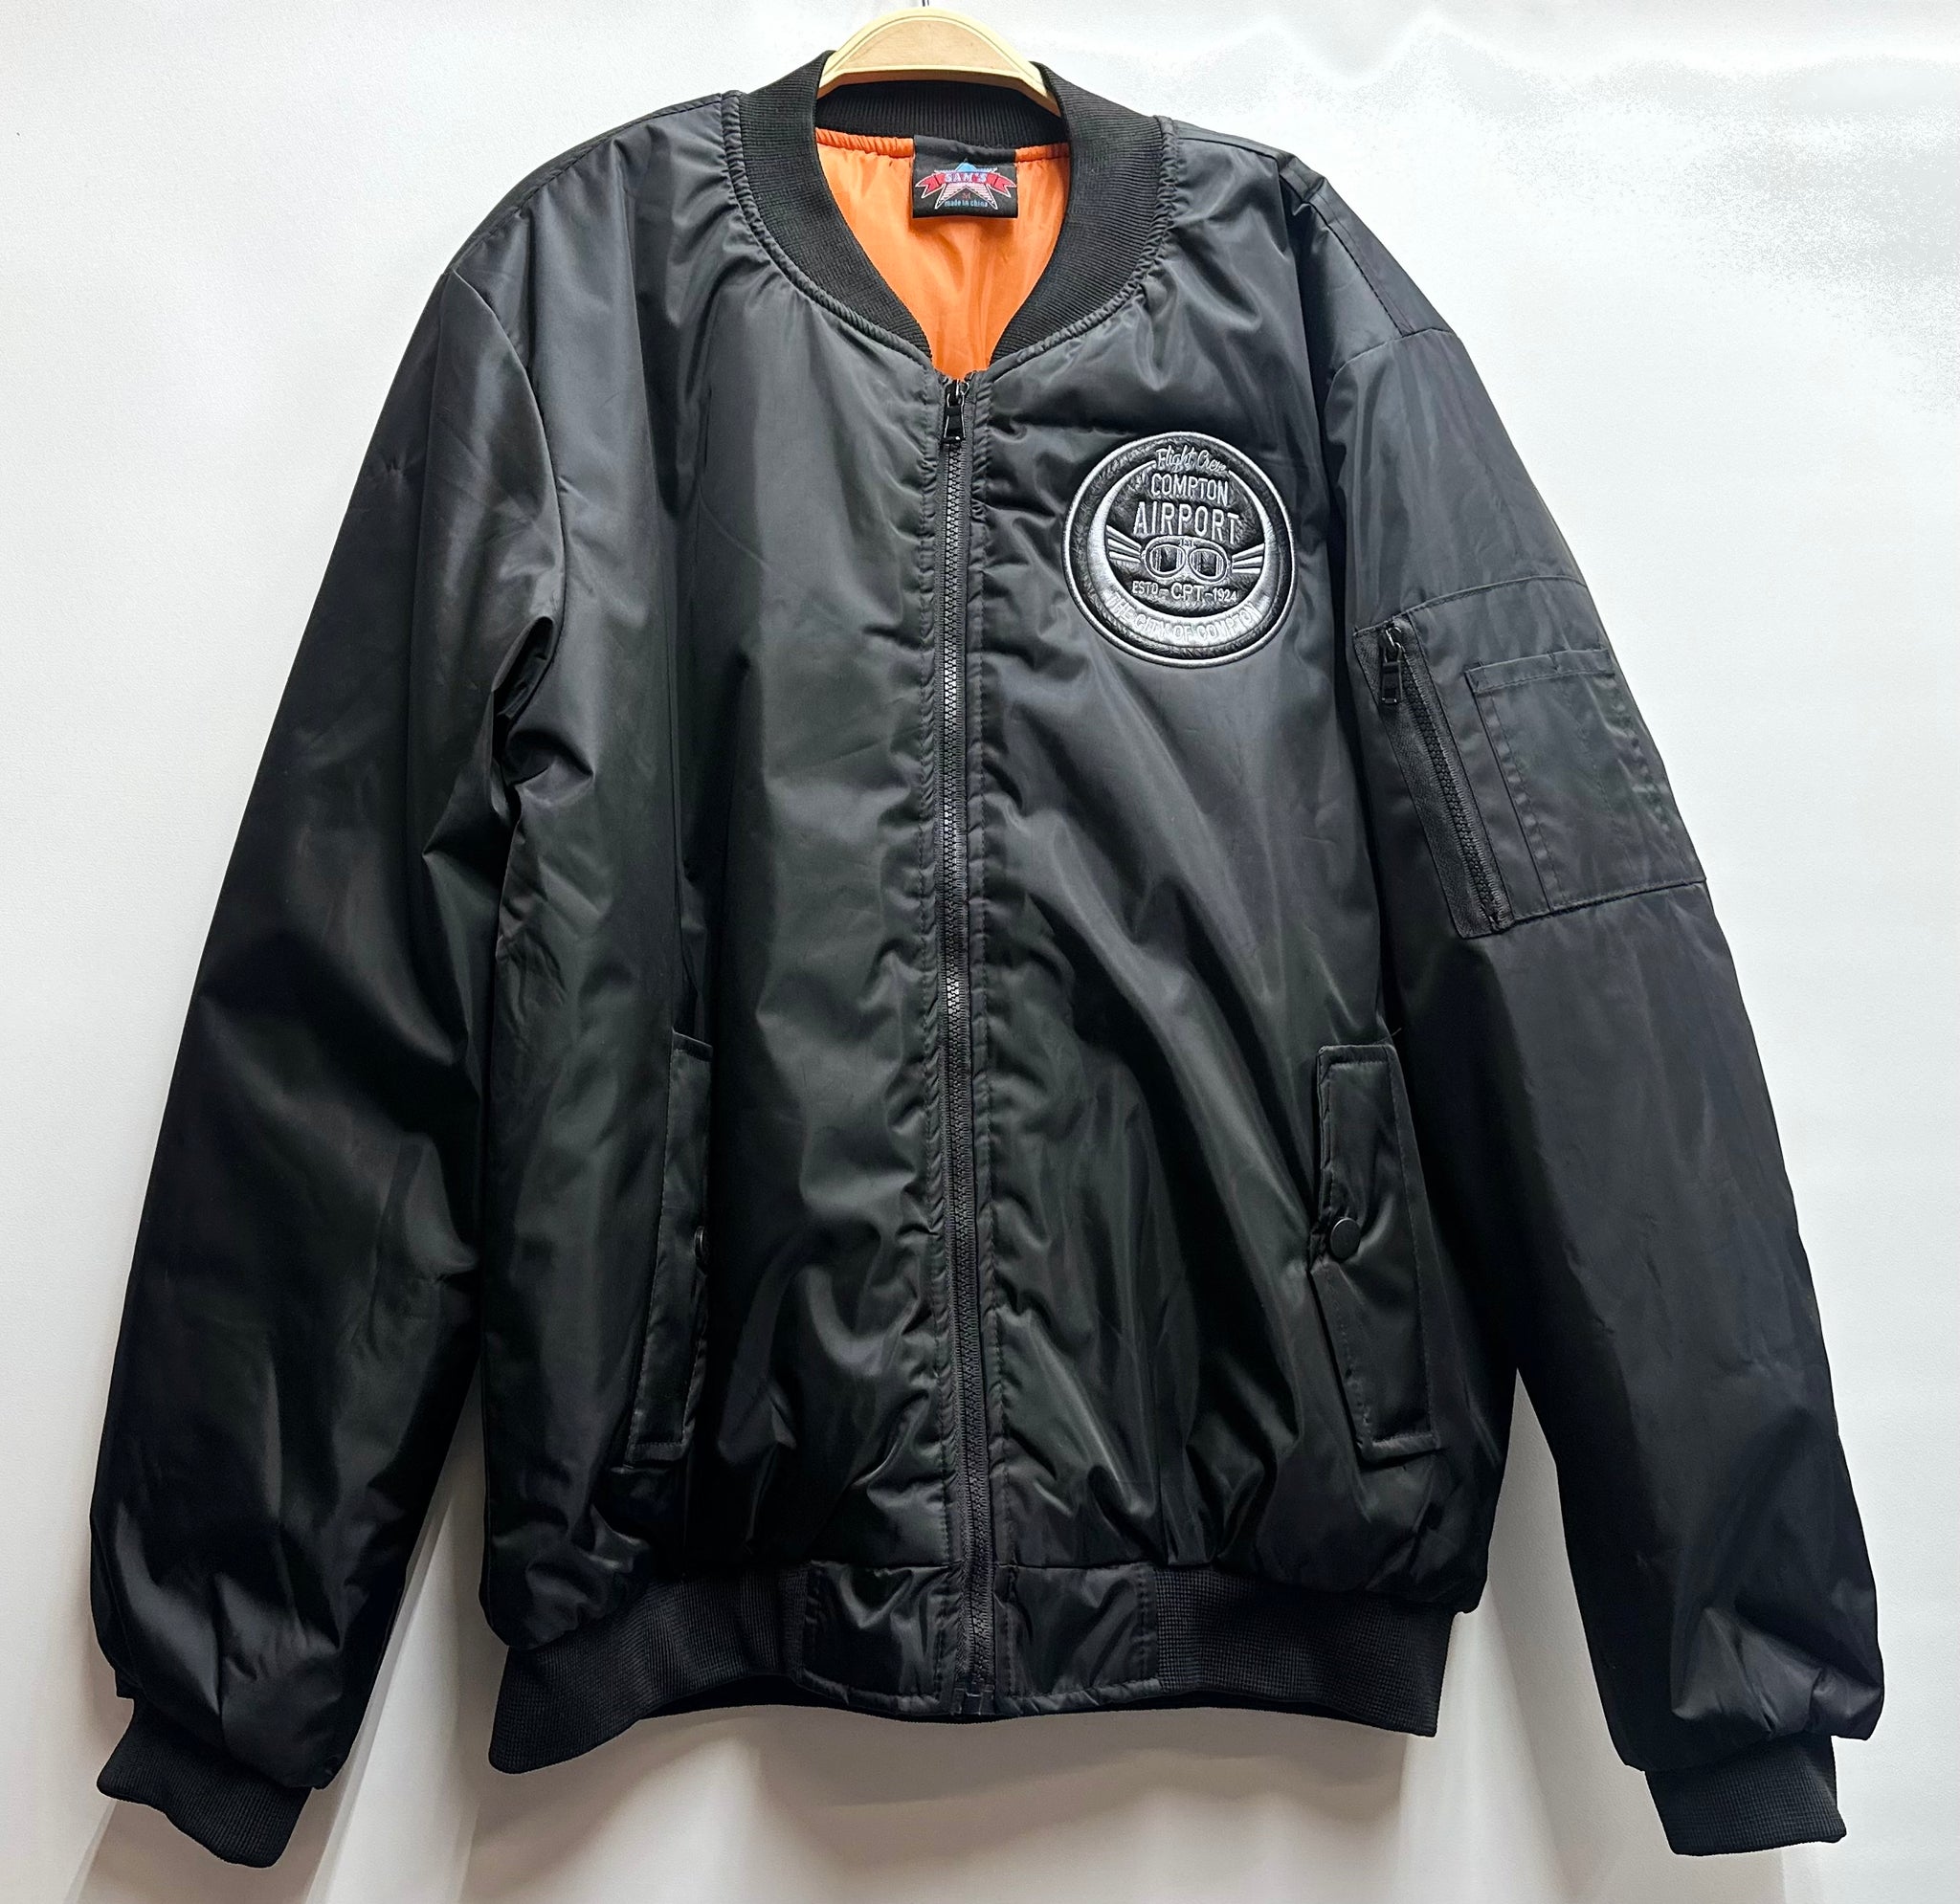 Compton Airport Bomber Jacket – Made In Compton Store